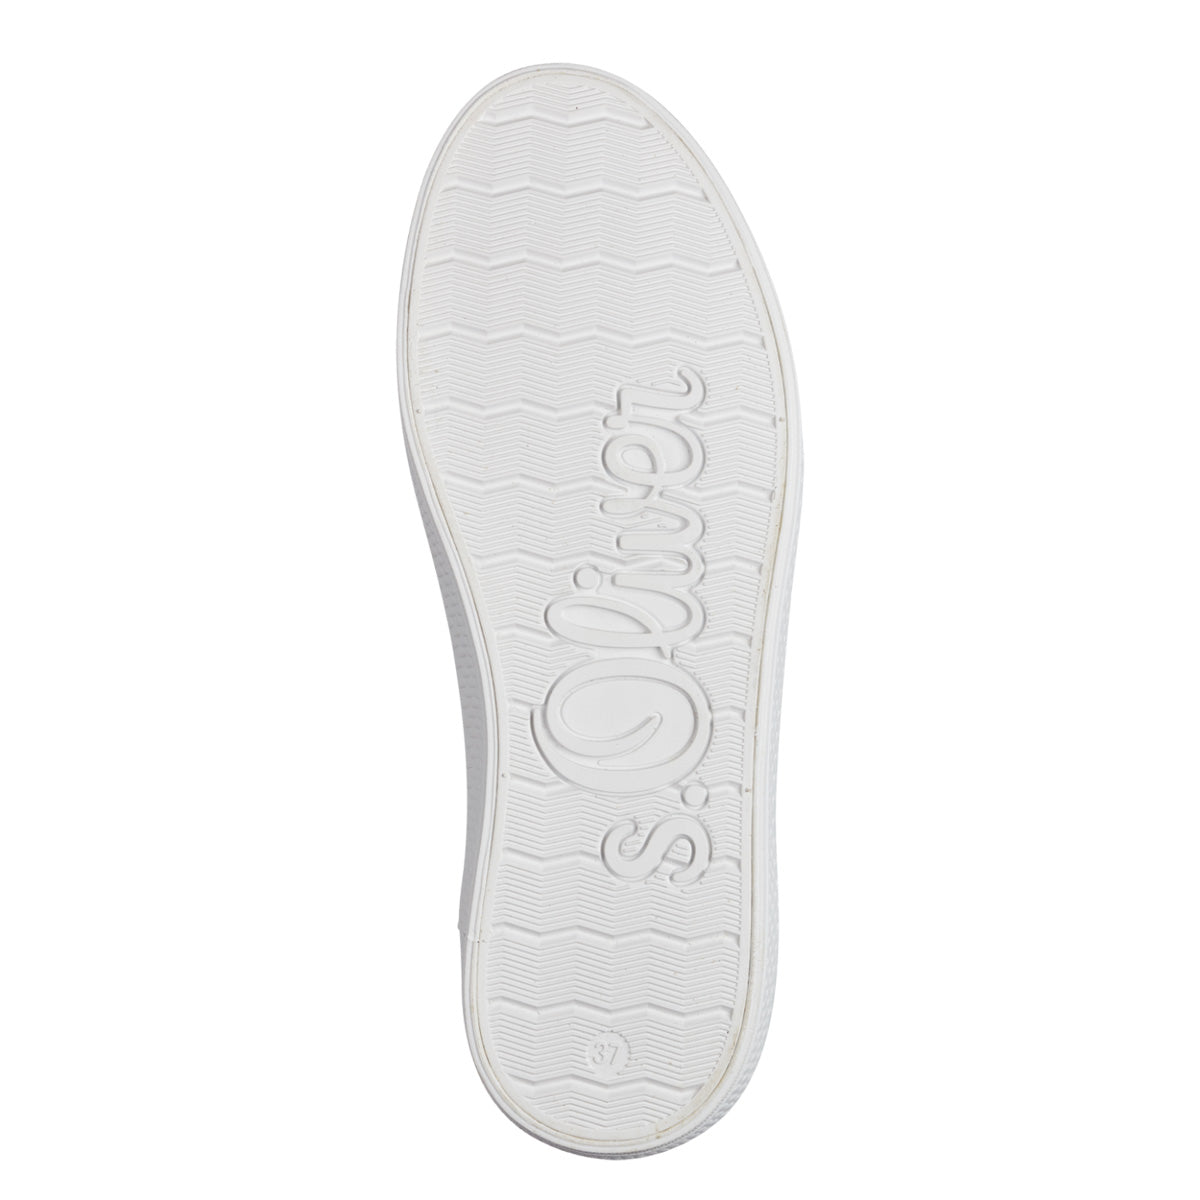 Bottom view focusing on the white flat sole's durability and style.